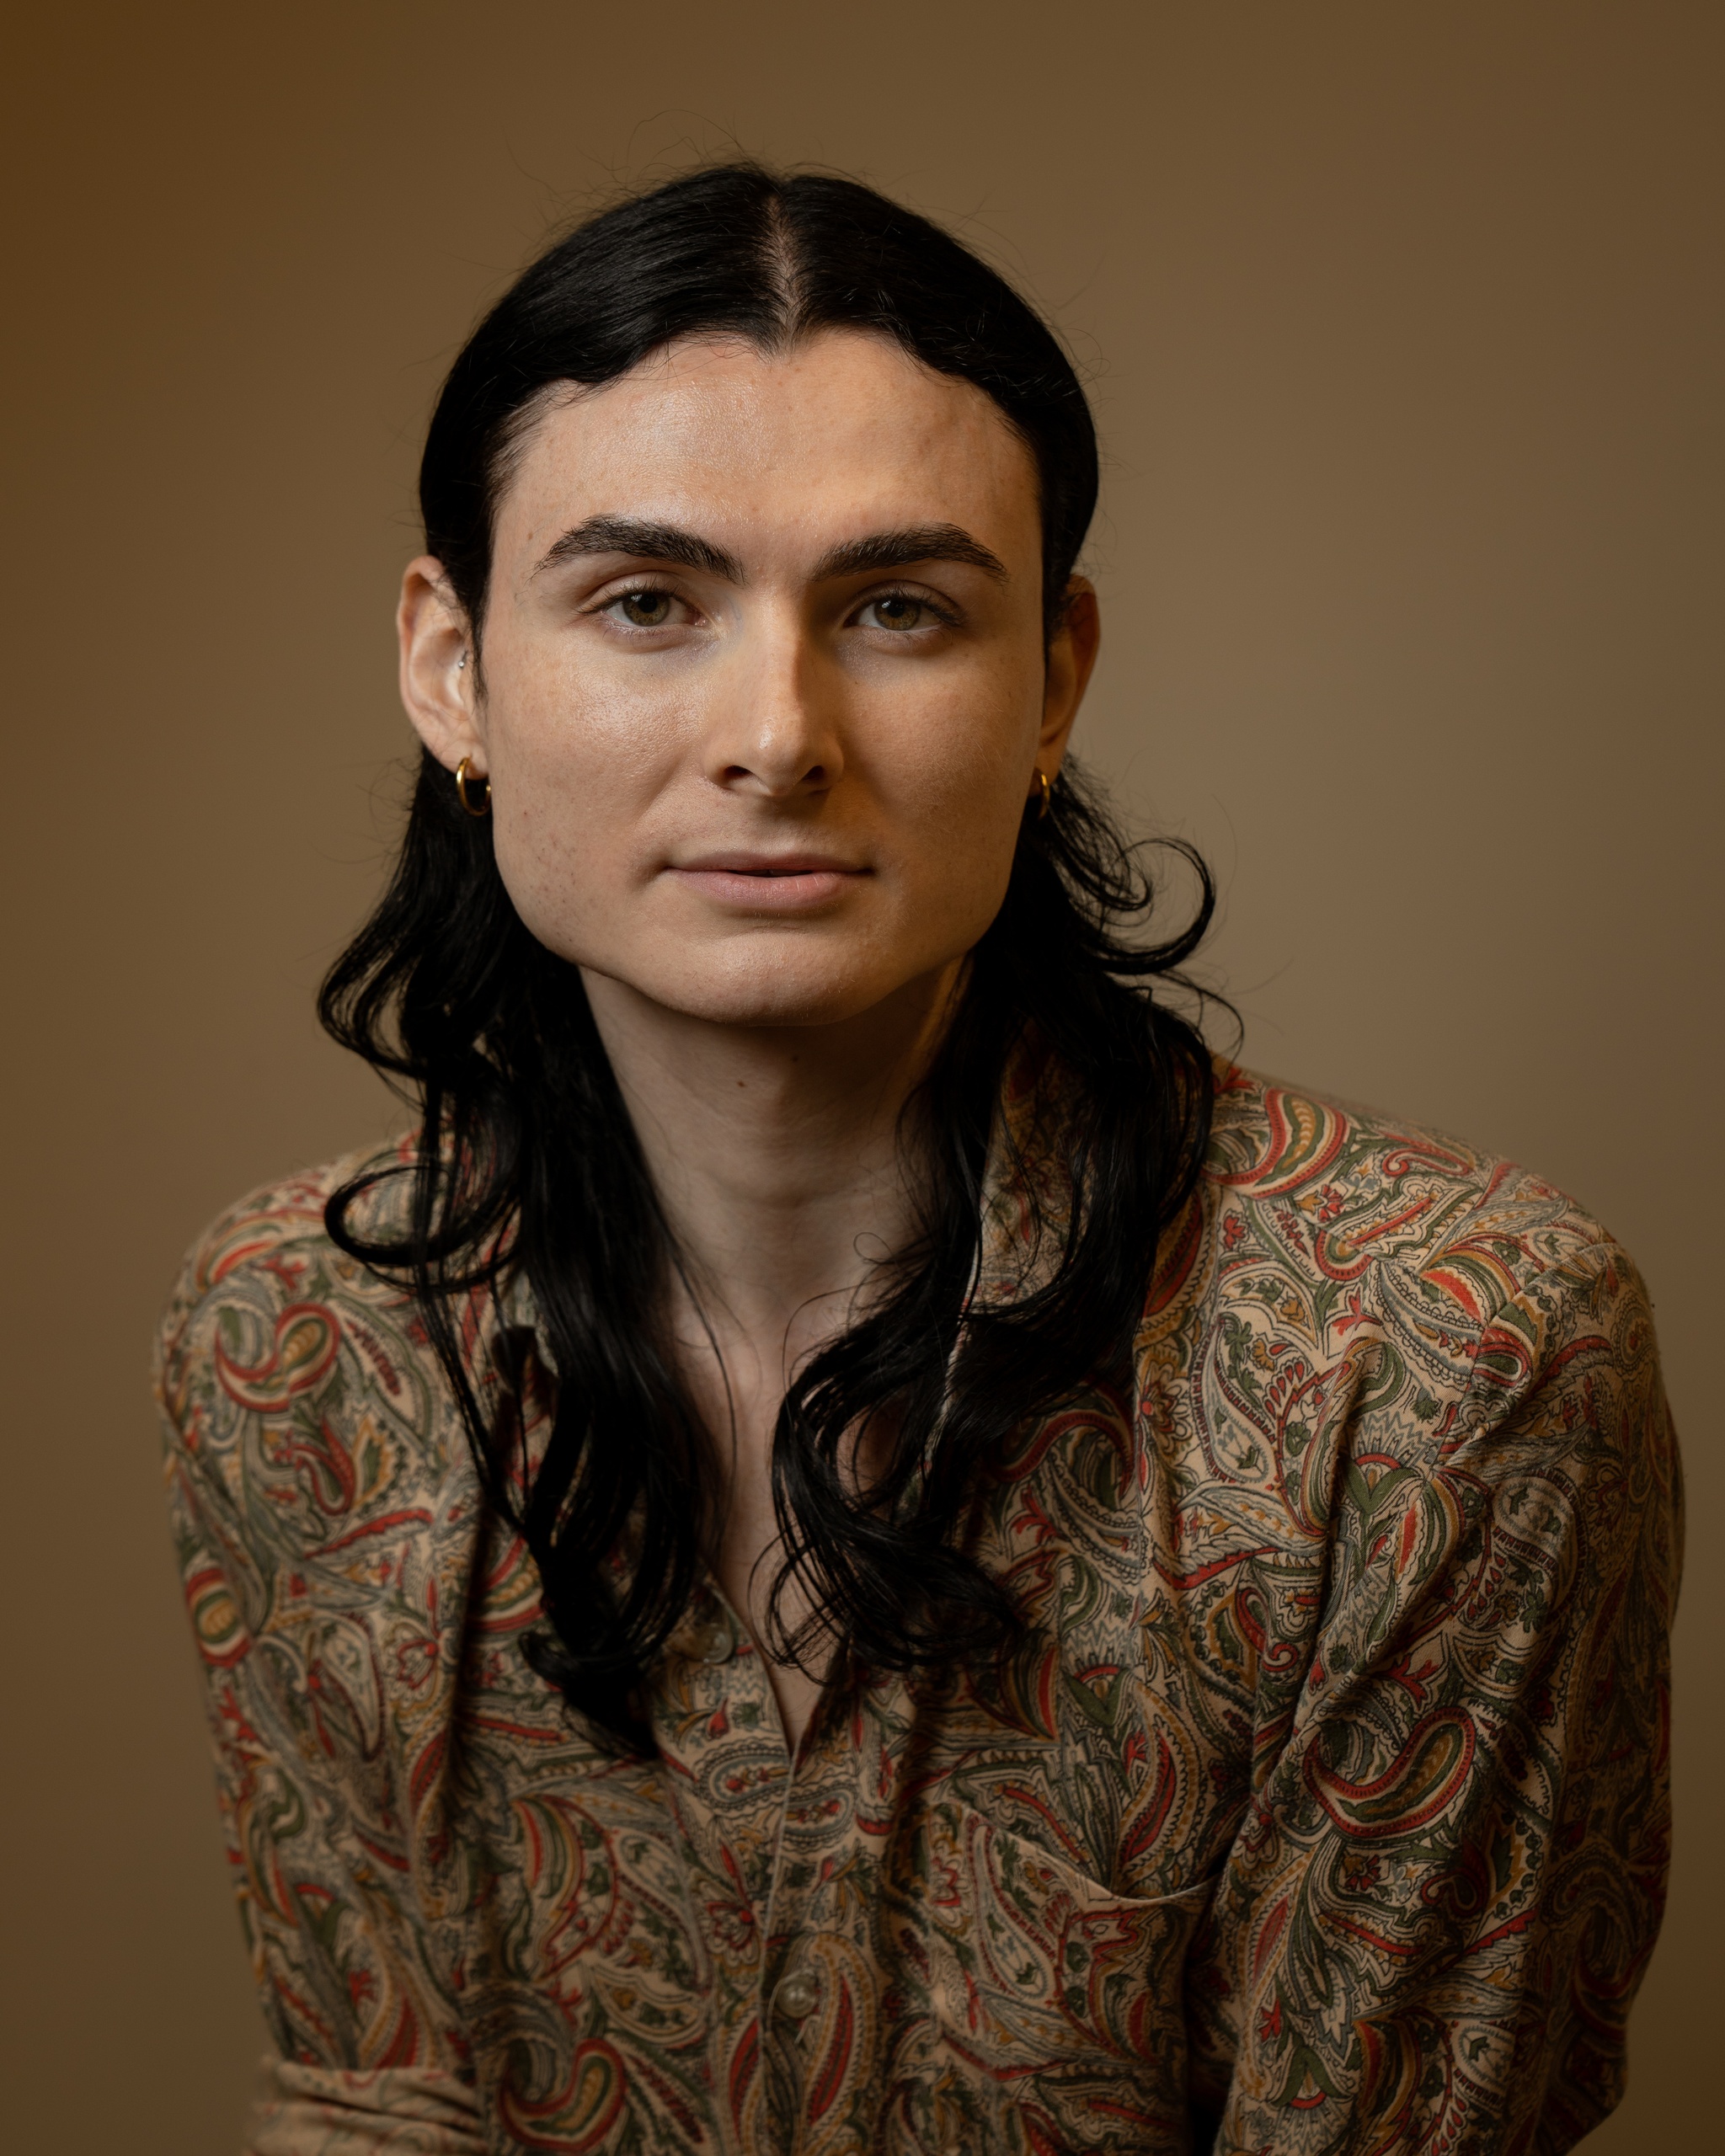 A portrait of Joshua Leon Eguia who poses against a neutral brown background. Joshue has long dark brown wavy hair that is tied back and falls to shoulder length. Joshua wears an earth-toned paisley print shirt and looks directly at us.